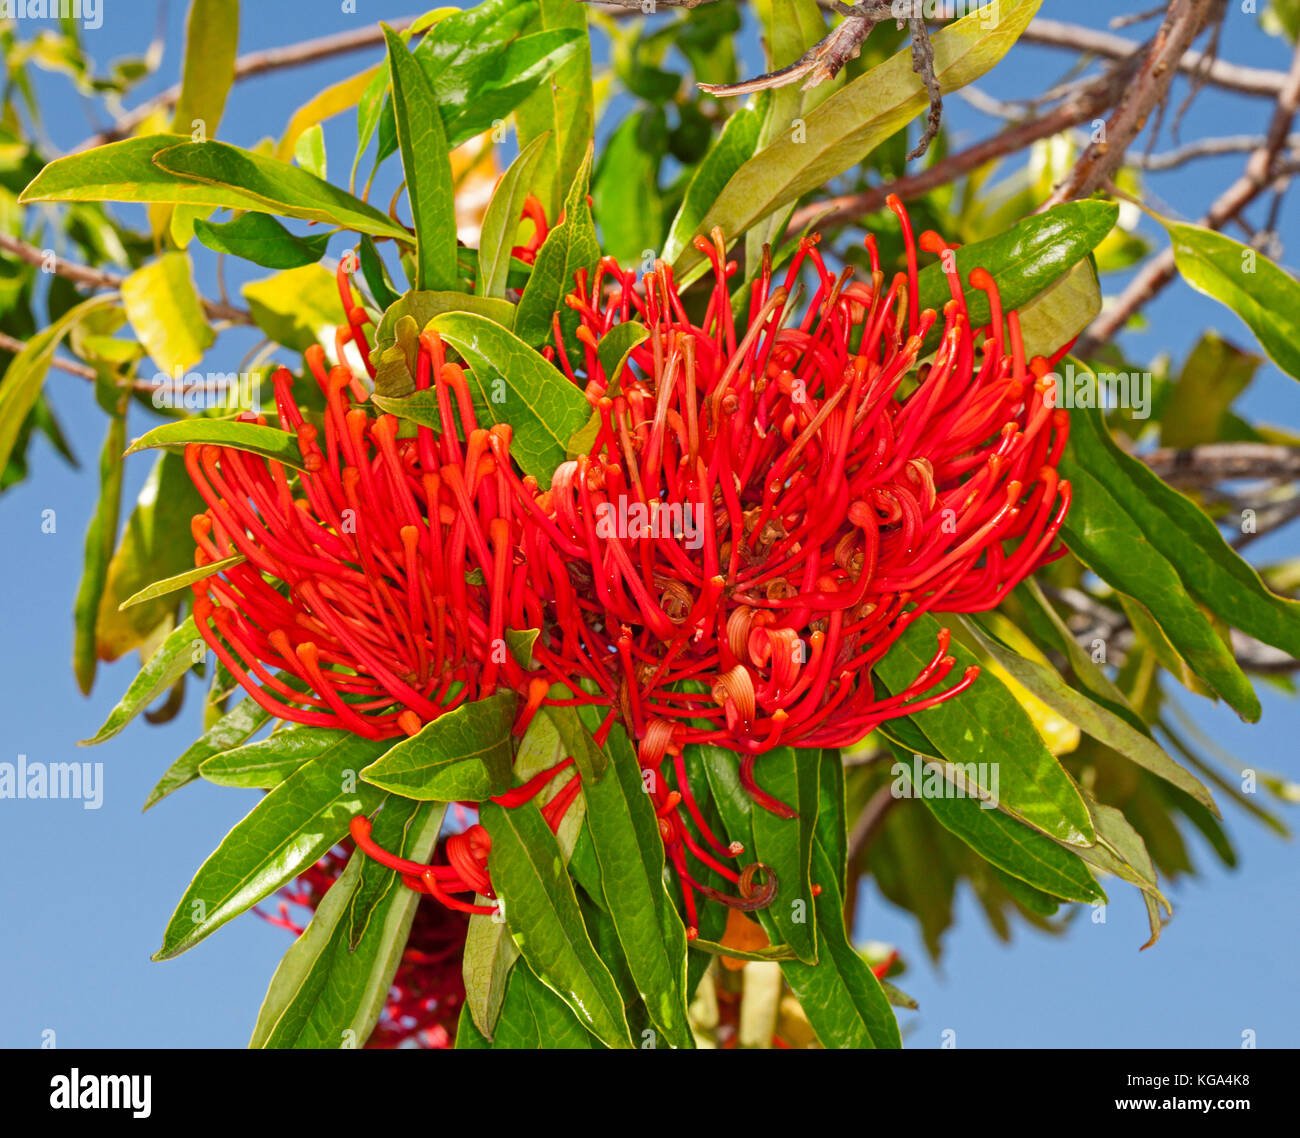 Cluster of unusual flame red flowers and green leaves of Alloxylon flammeum syn Oreocallis wickhamii, Queensland tree waratah, against blue sky Stock Photo